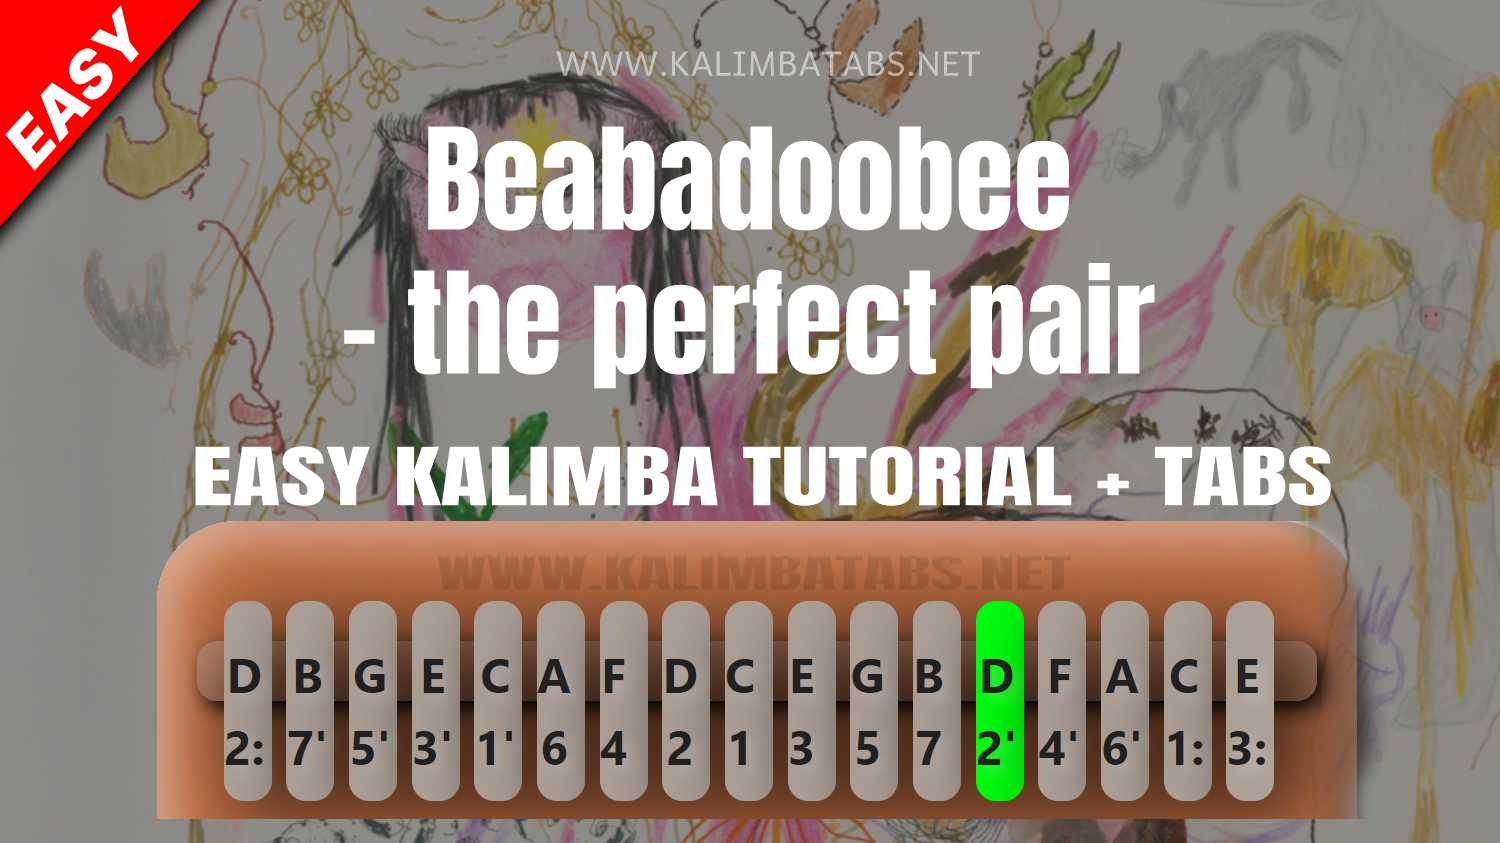 Free The Perfect Pair by beabadoobee sheet music